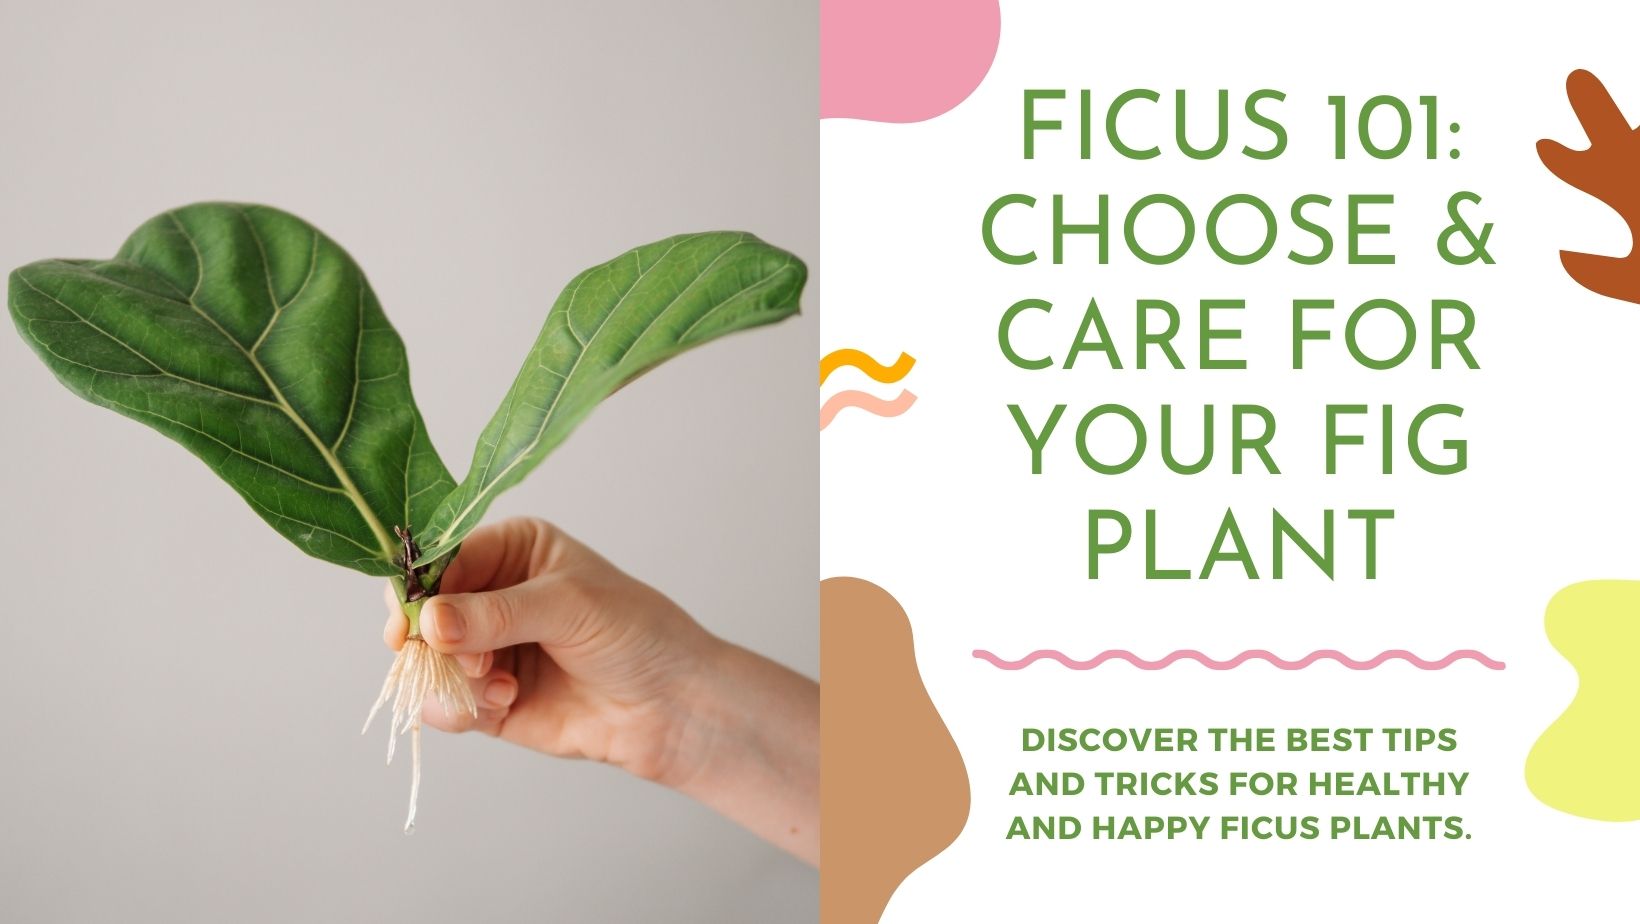 Ficus 101: Choose & Care For Your Fig Plant - Tumbleweed Plants Singapore